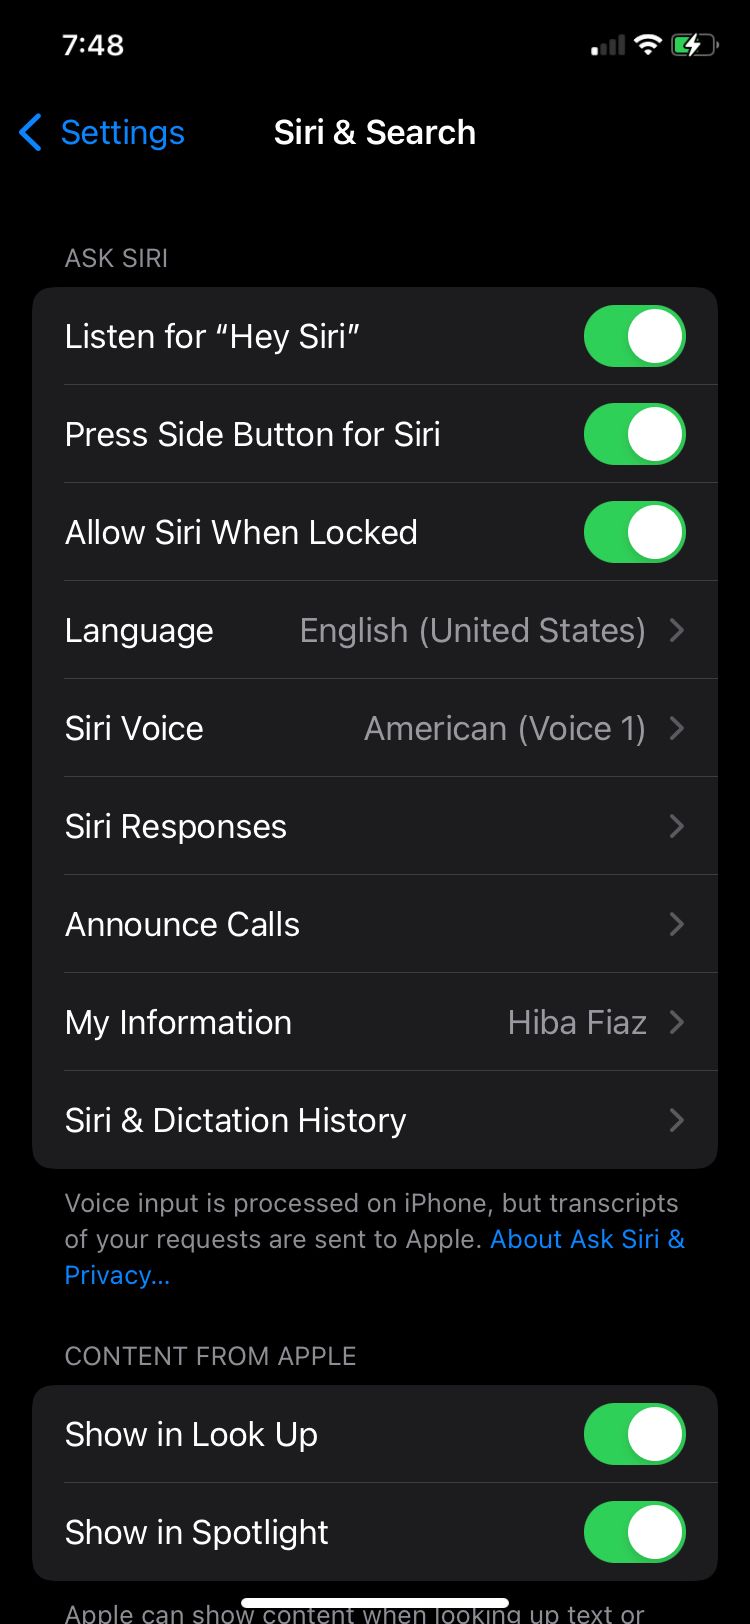 toggle for hey siri and allow siri when locked